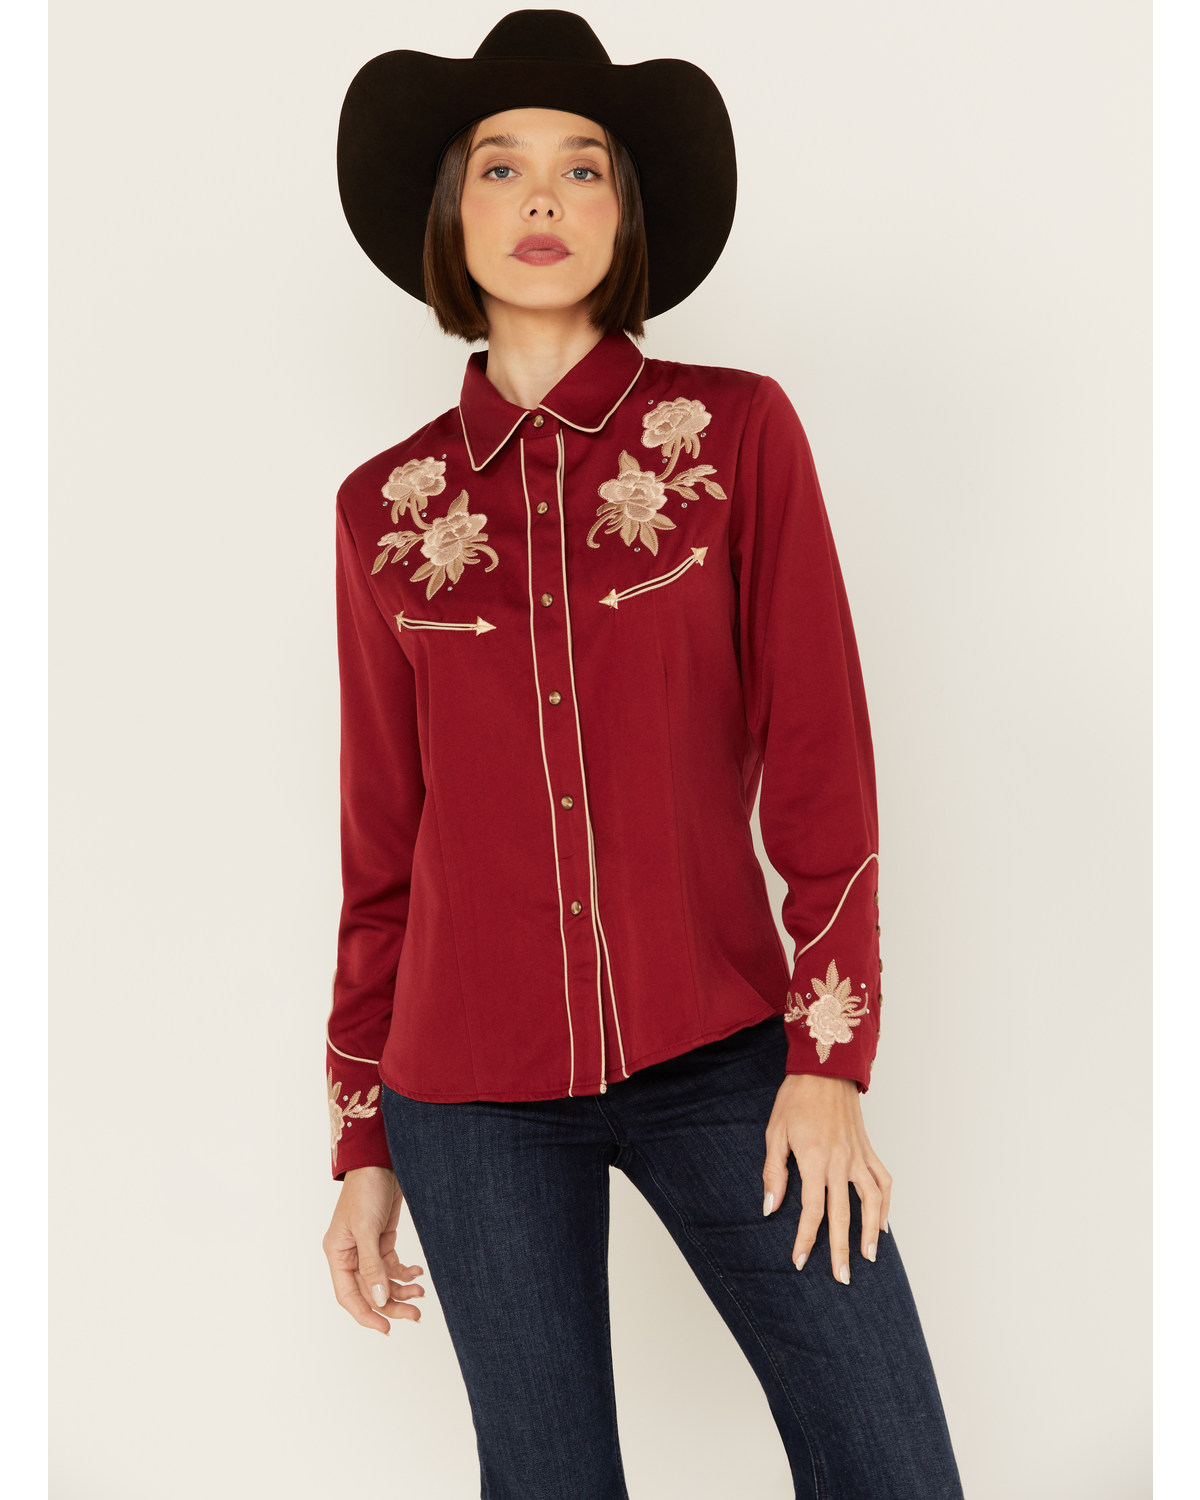 Scully Women's Floral Embroidered Long Sleeve Snap Western Shirt